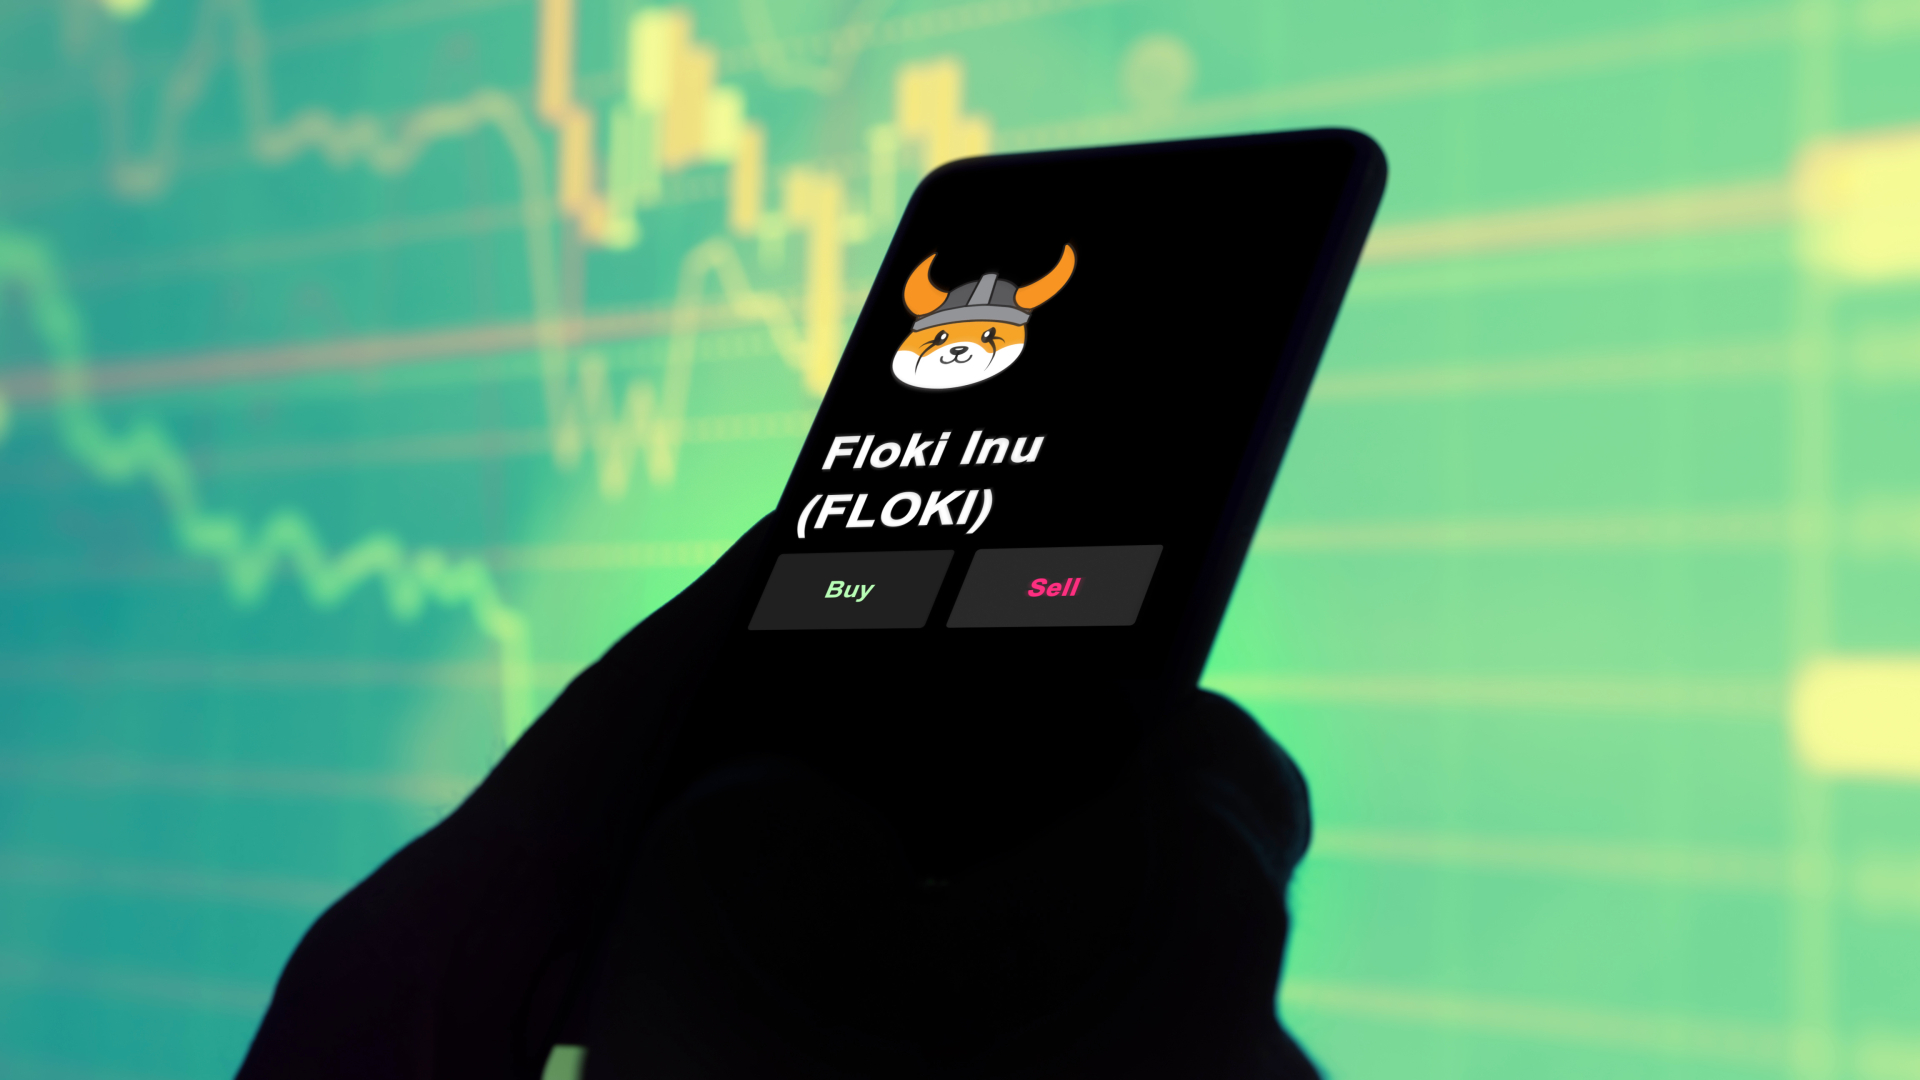 Floki Inu is up 430%, surpassing Shiba Inu and Dogecoin
